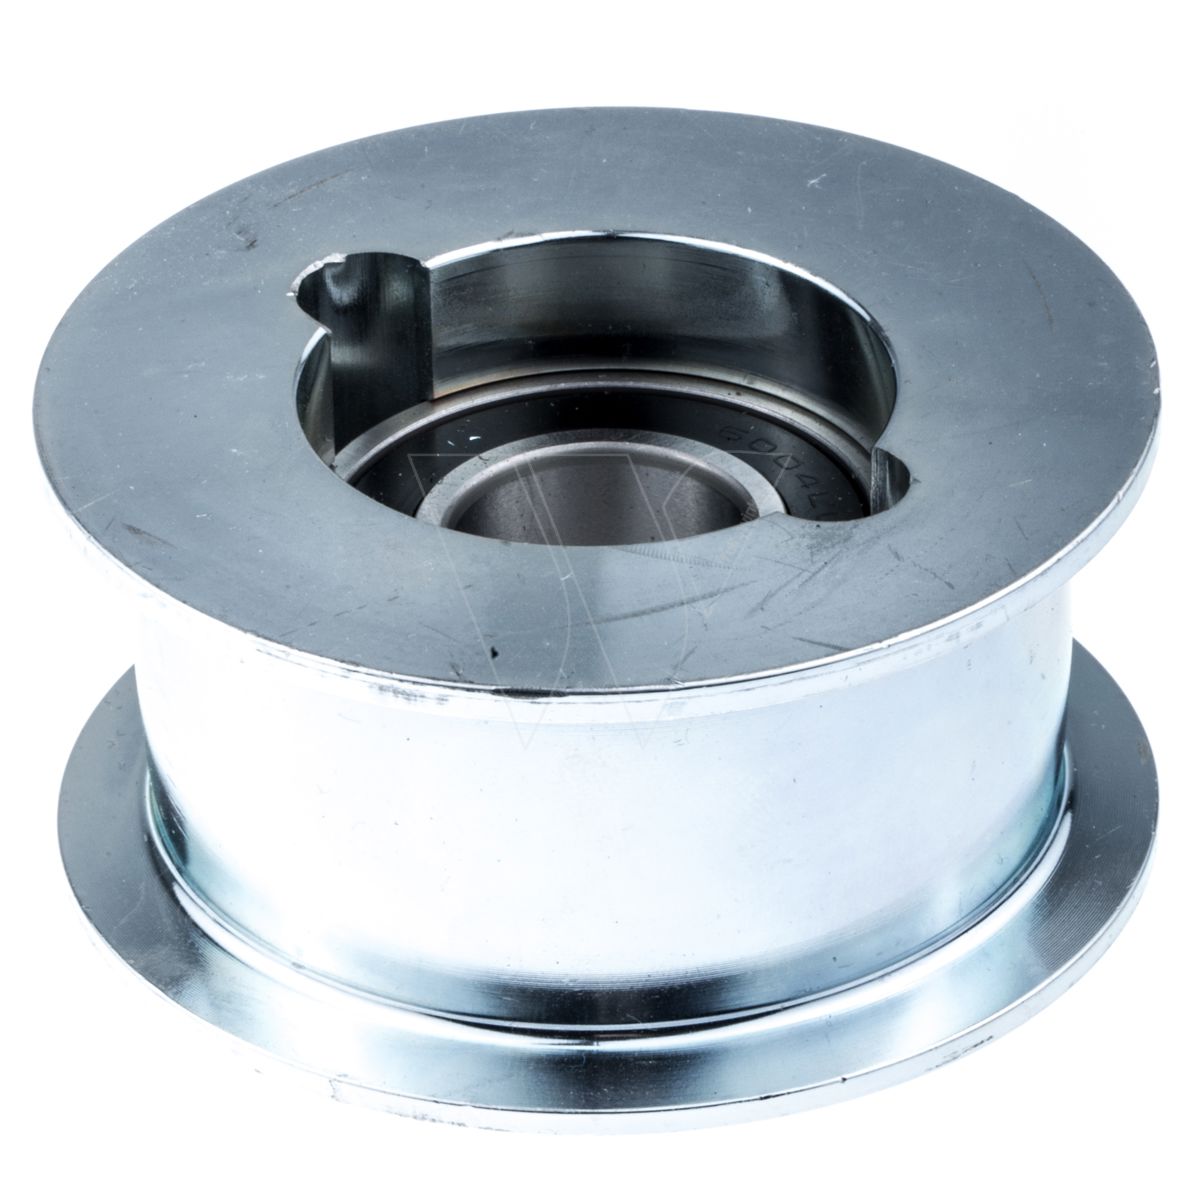 Husqvarna tension pulley with bearing